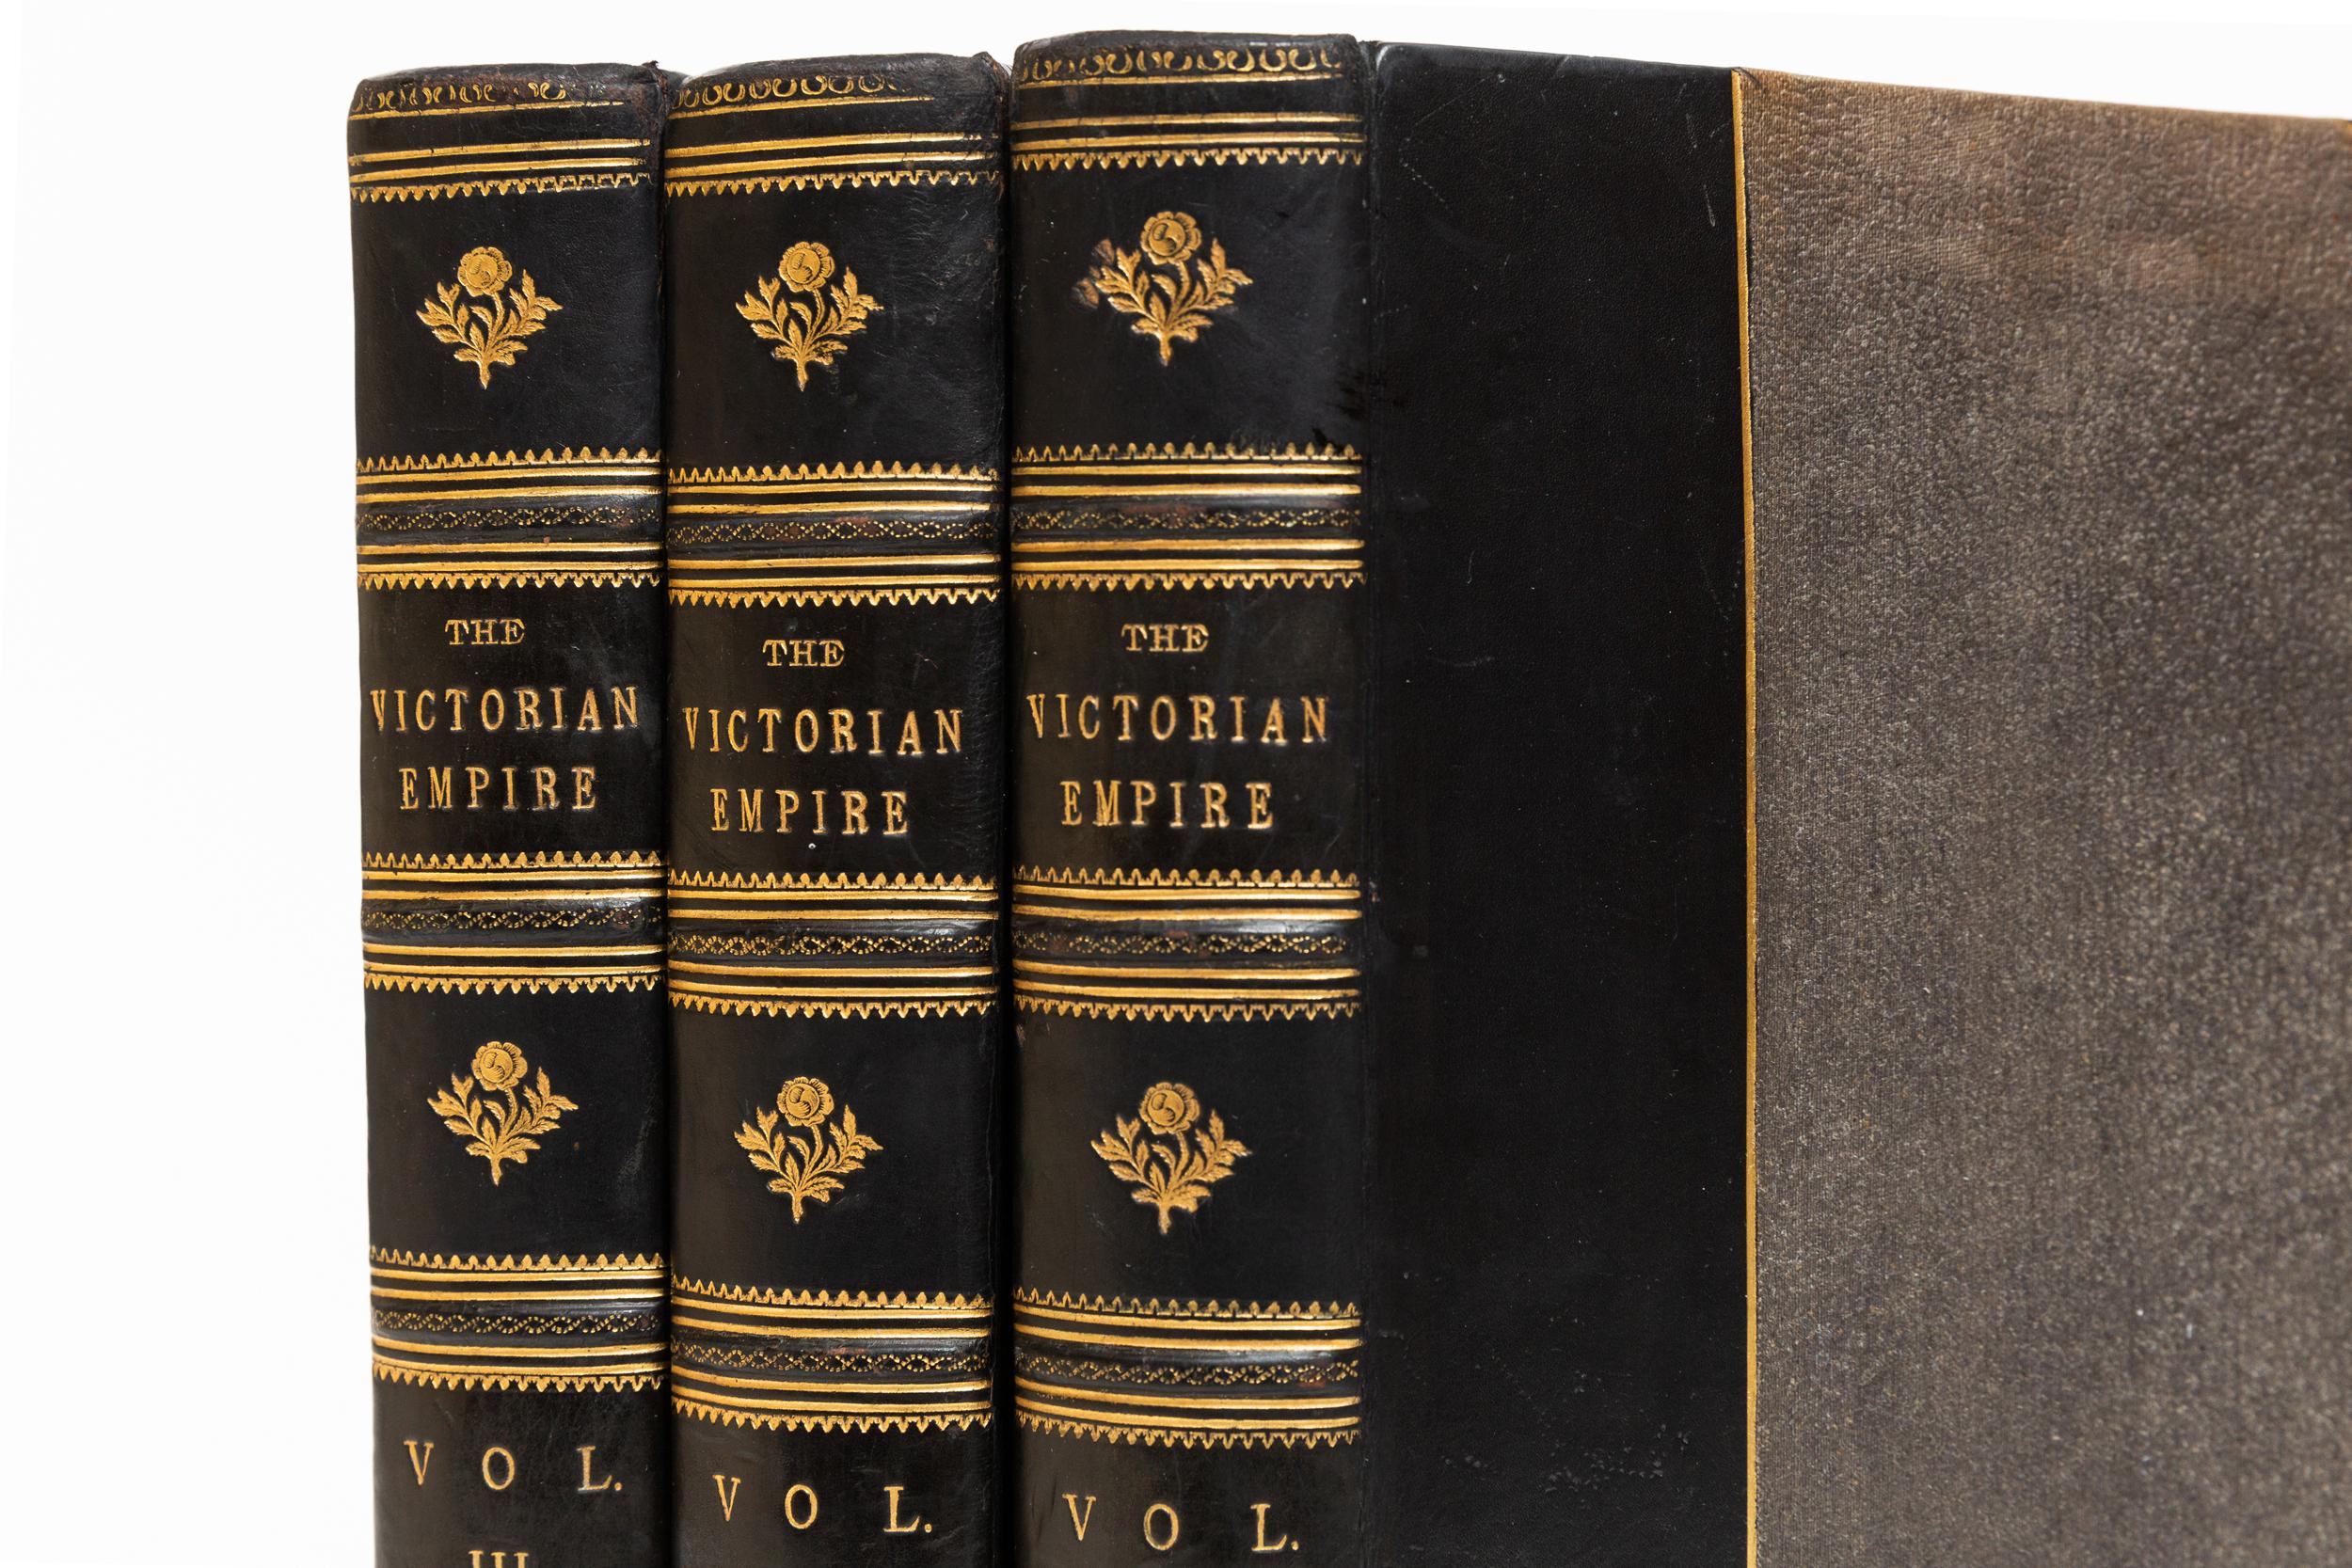 3 Volumes. James Taylor. The Victorian Empire. A Brilliant Epoch In Our National History.Bound in 3/4 blue calf, linen boards, marbled endpapers, top edges gilt,
raised bands, gilt panels, illustrated. Published: London: William MacKenzie.